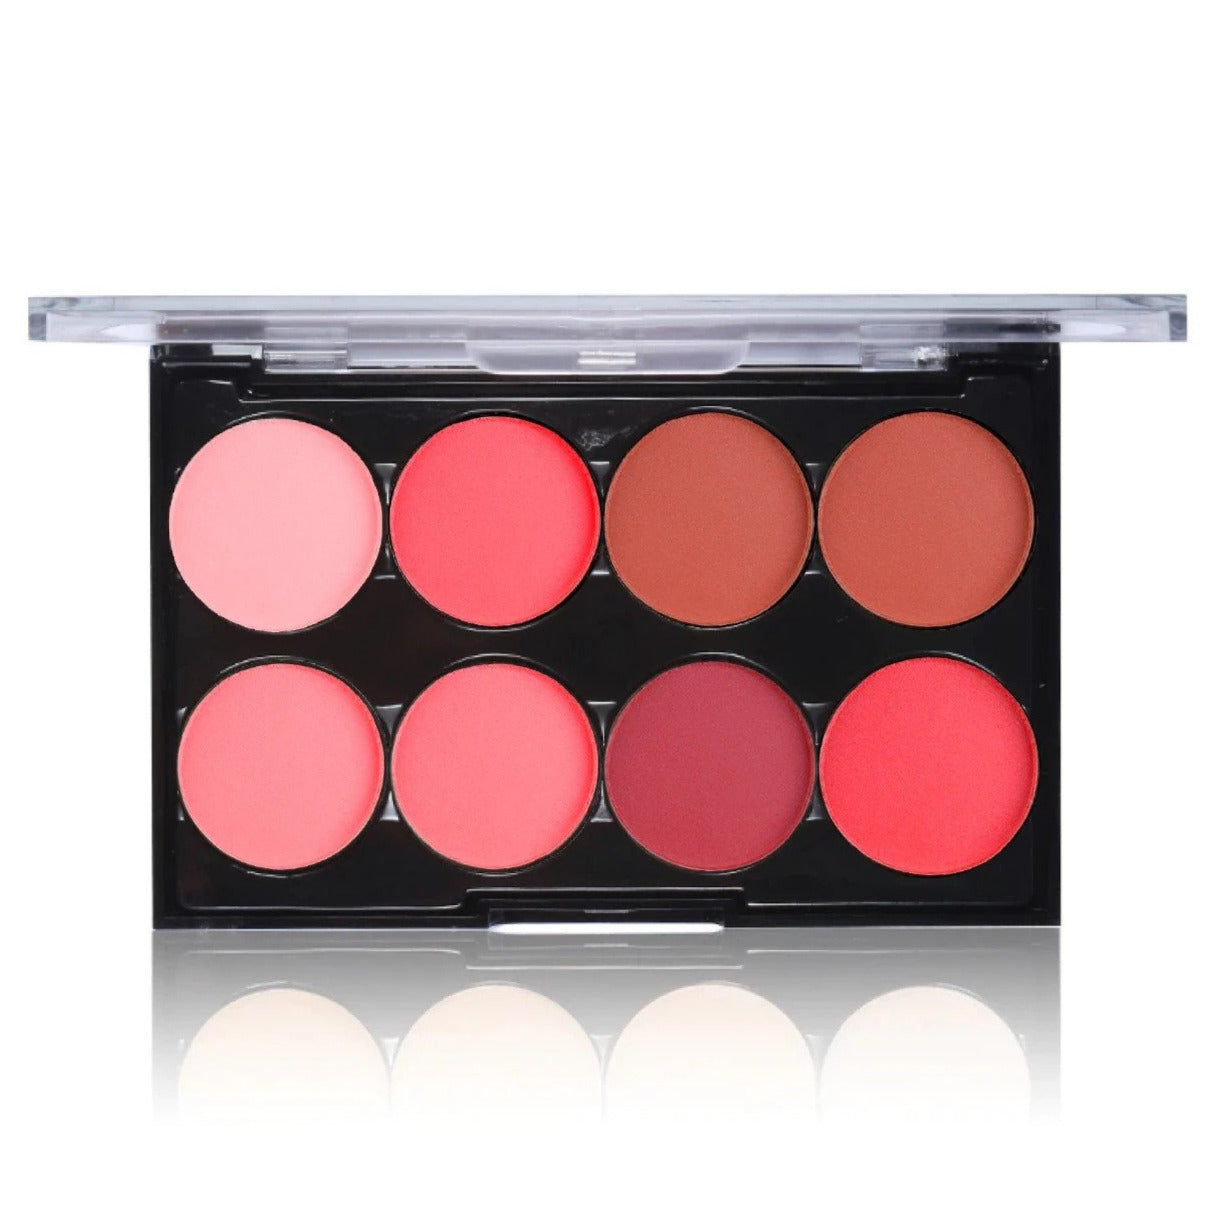 Buy  MUICIN - Matte Blusher Kit 8 Colors - at Best Price Online in Pakistan